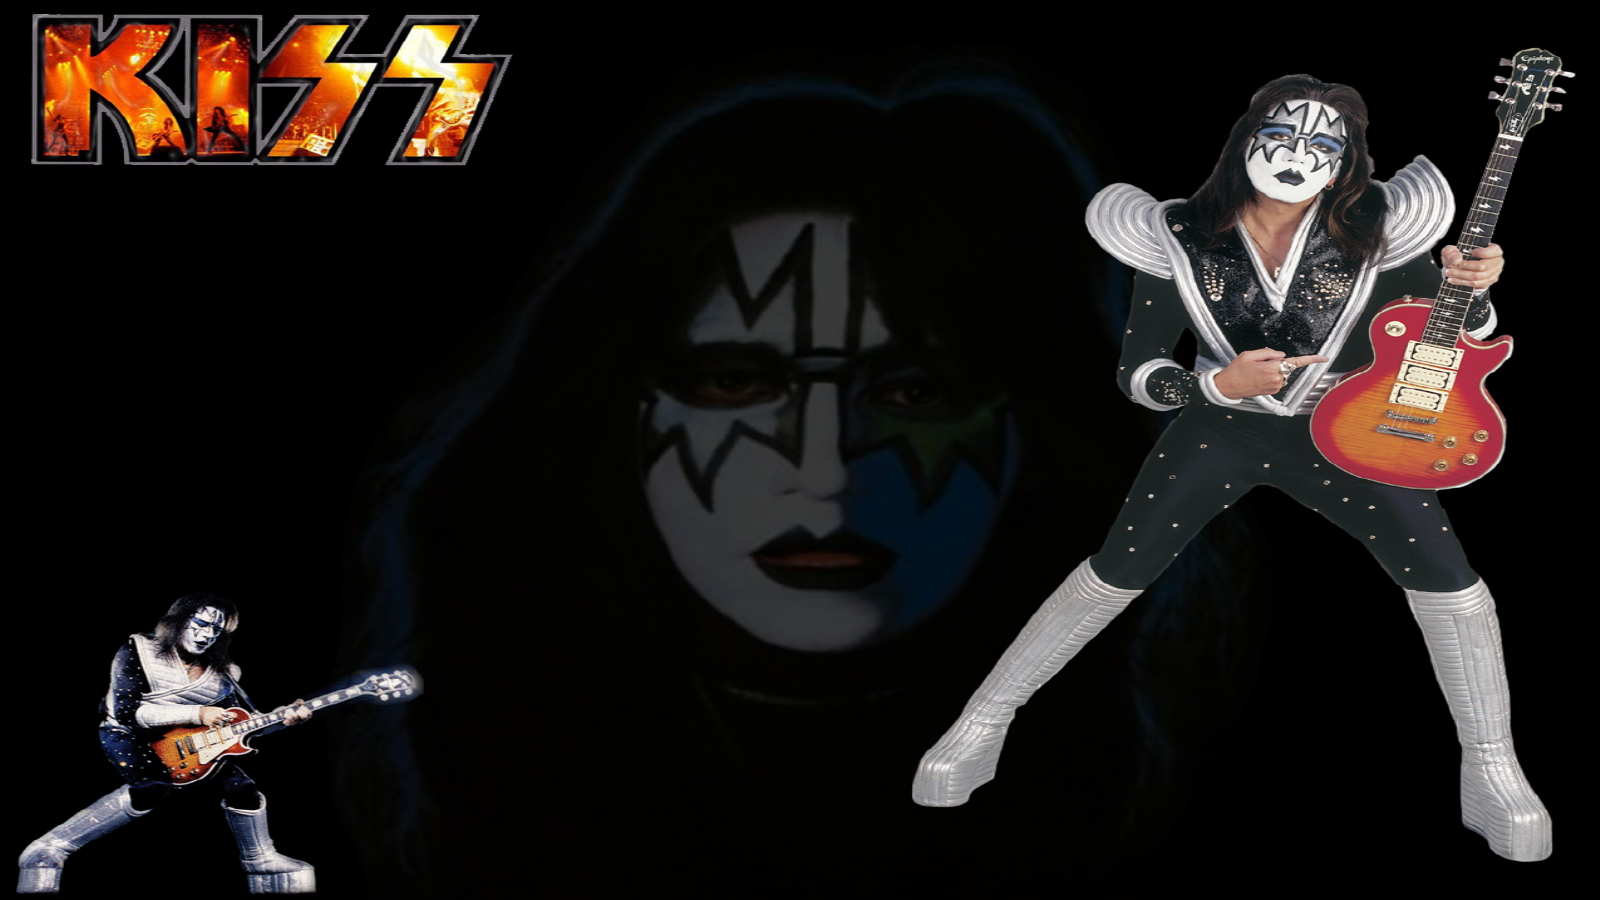 Ace From Kiss Computer Wallpapers Desktop Backgrounds